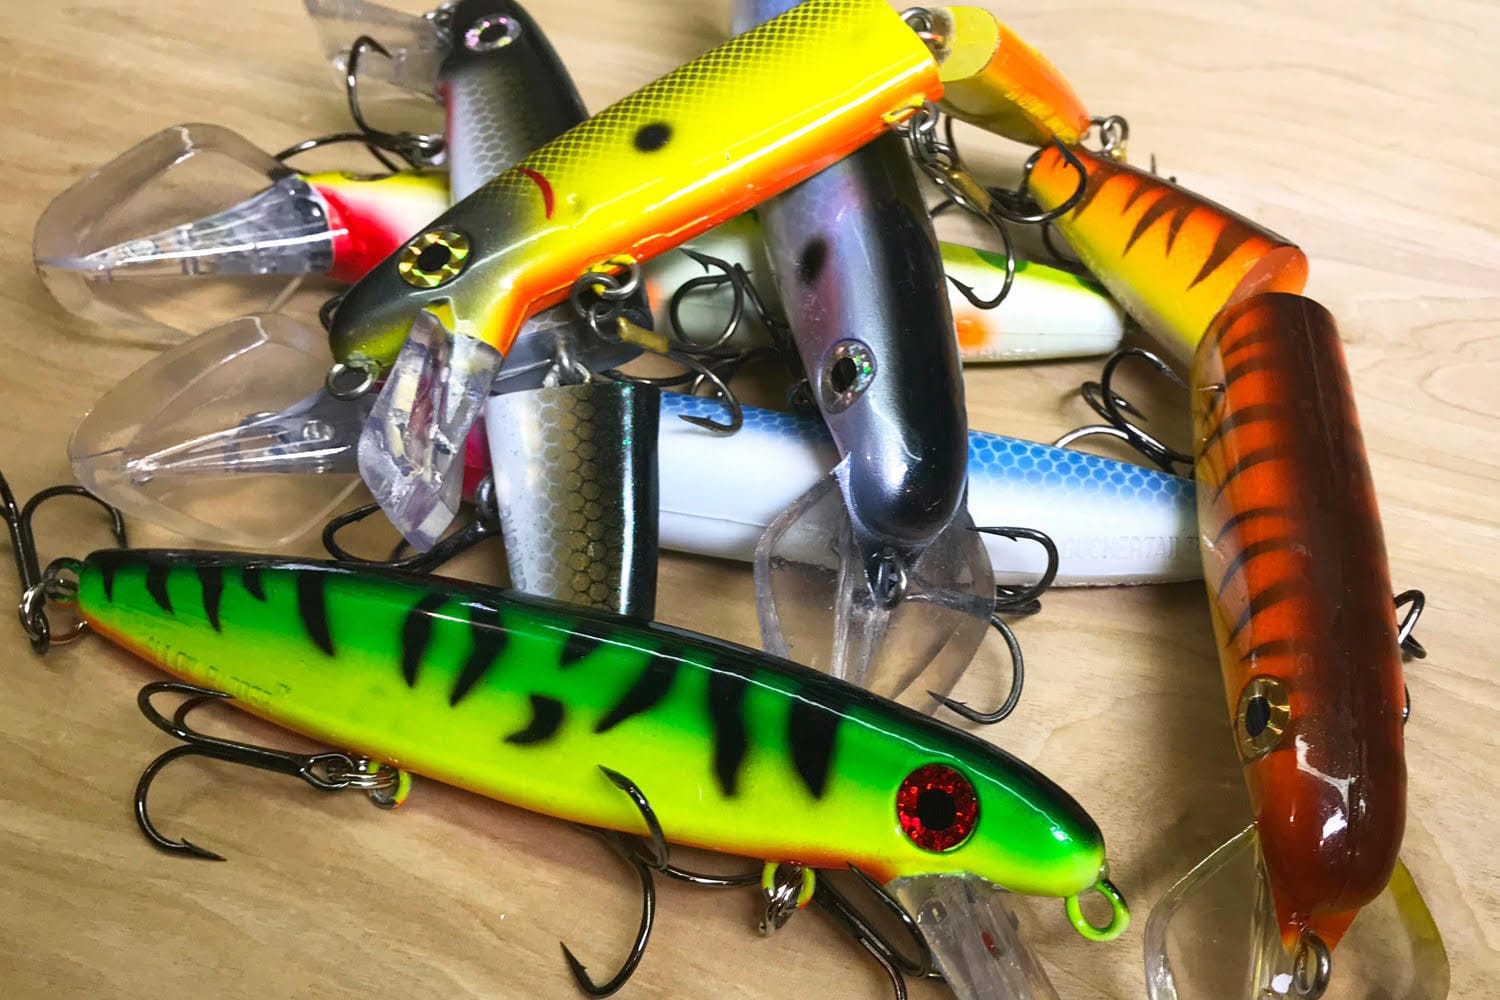 How important is fishing lure color? Does lure color make a difference?